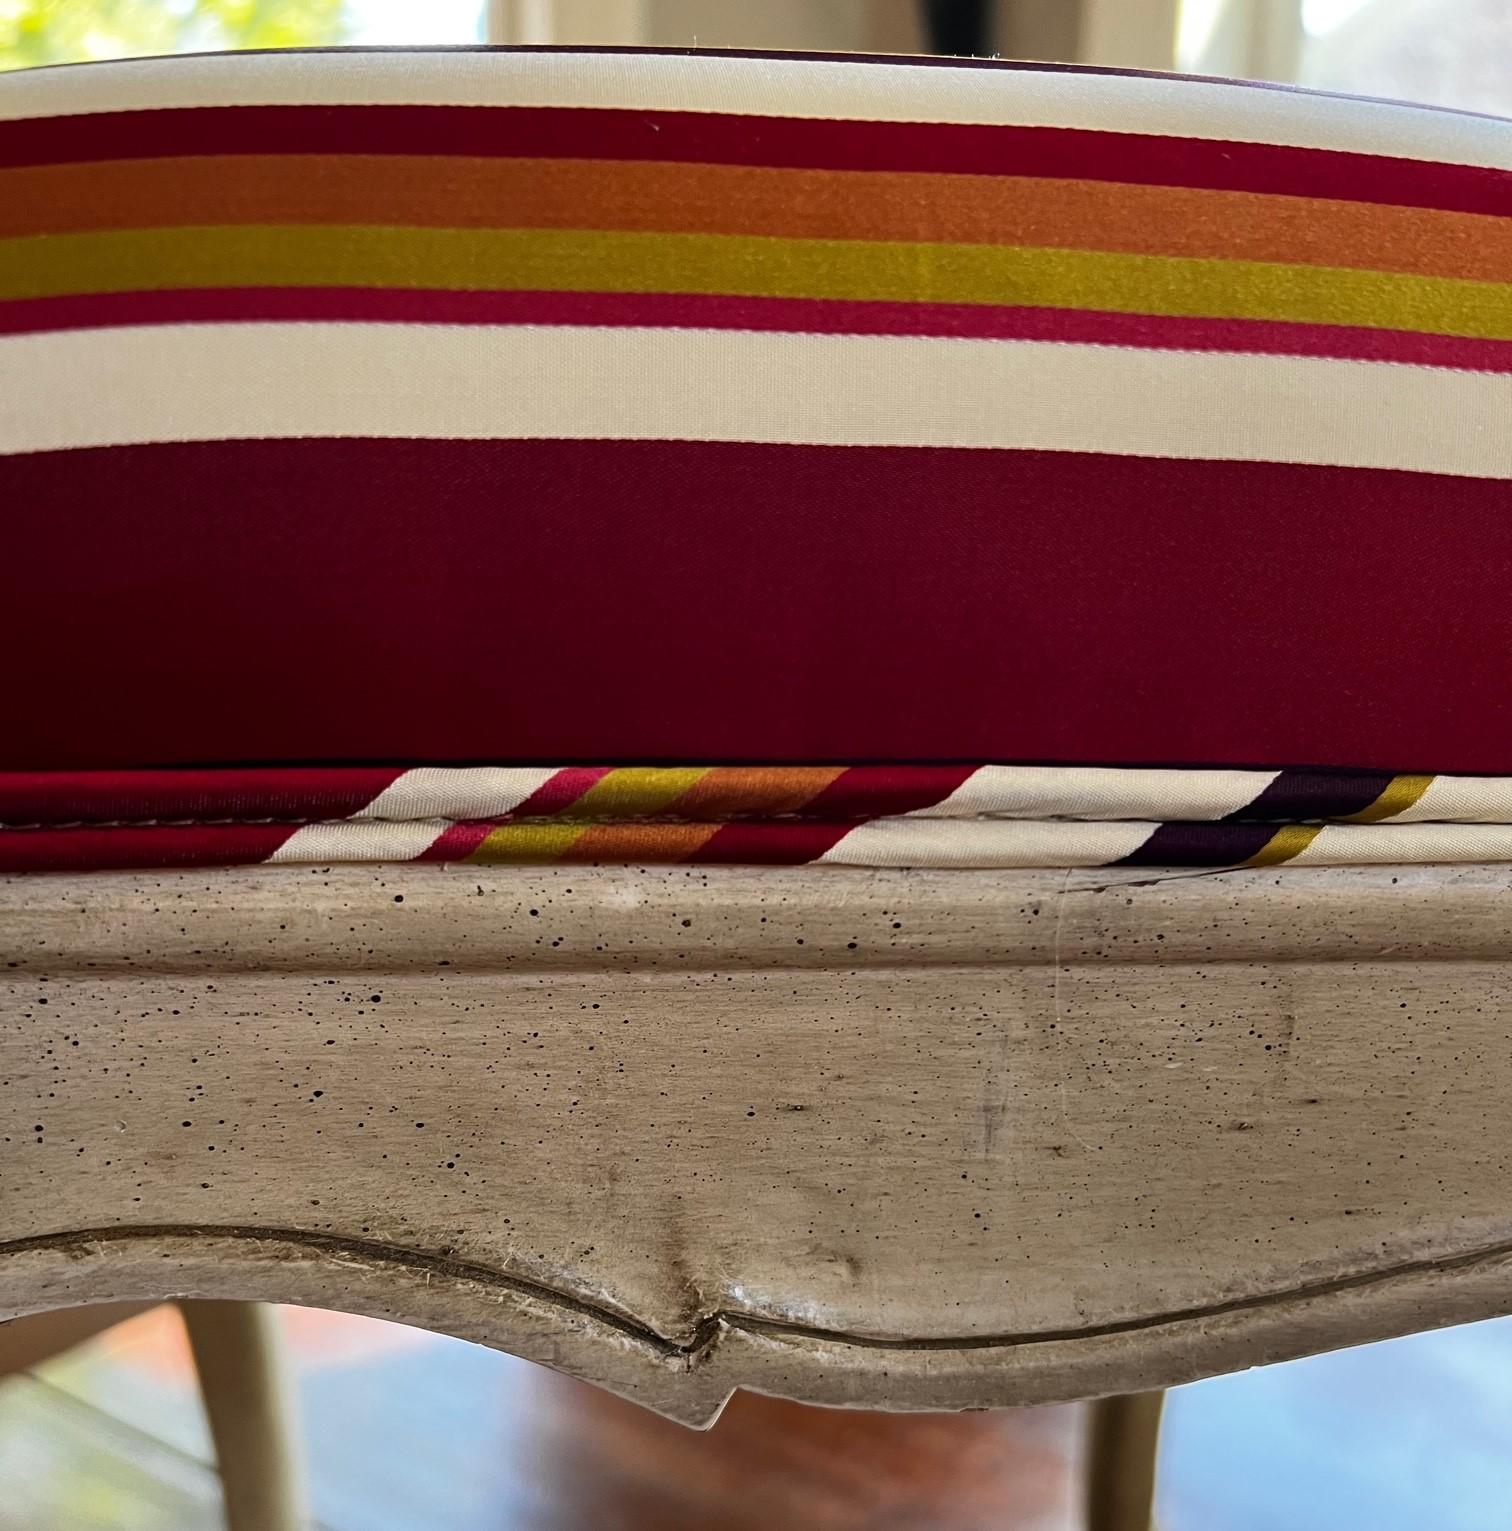 Vintage Thomas De Angelis Stool in Manuel Canovas Silk Stripe Fabric In Good Condition For Sale In Morristown, NJ